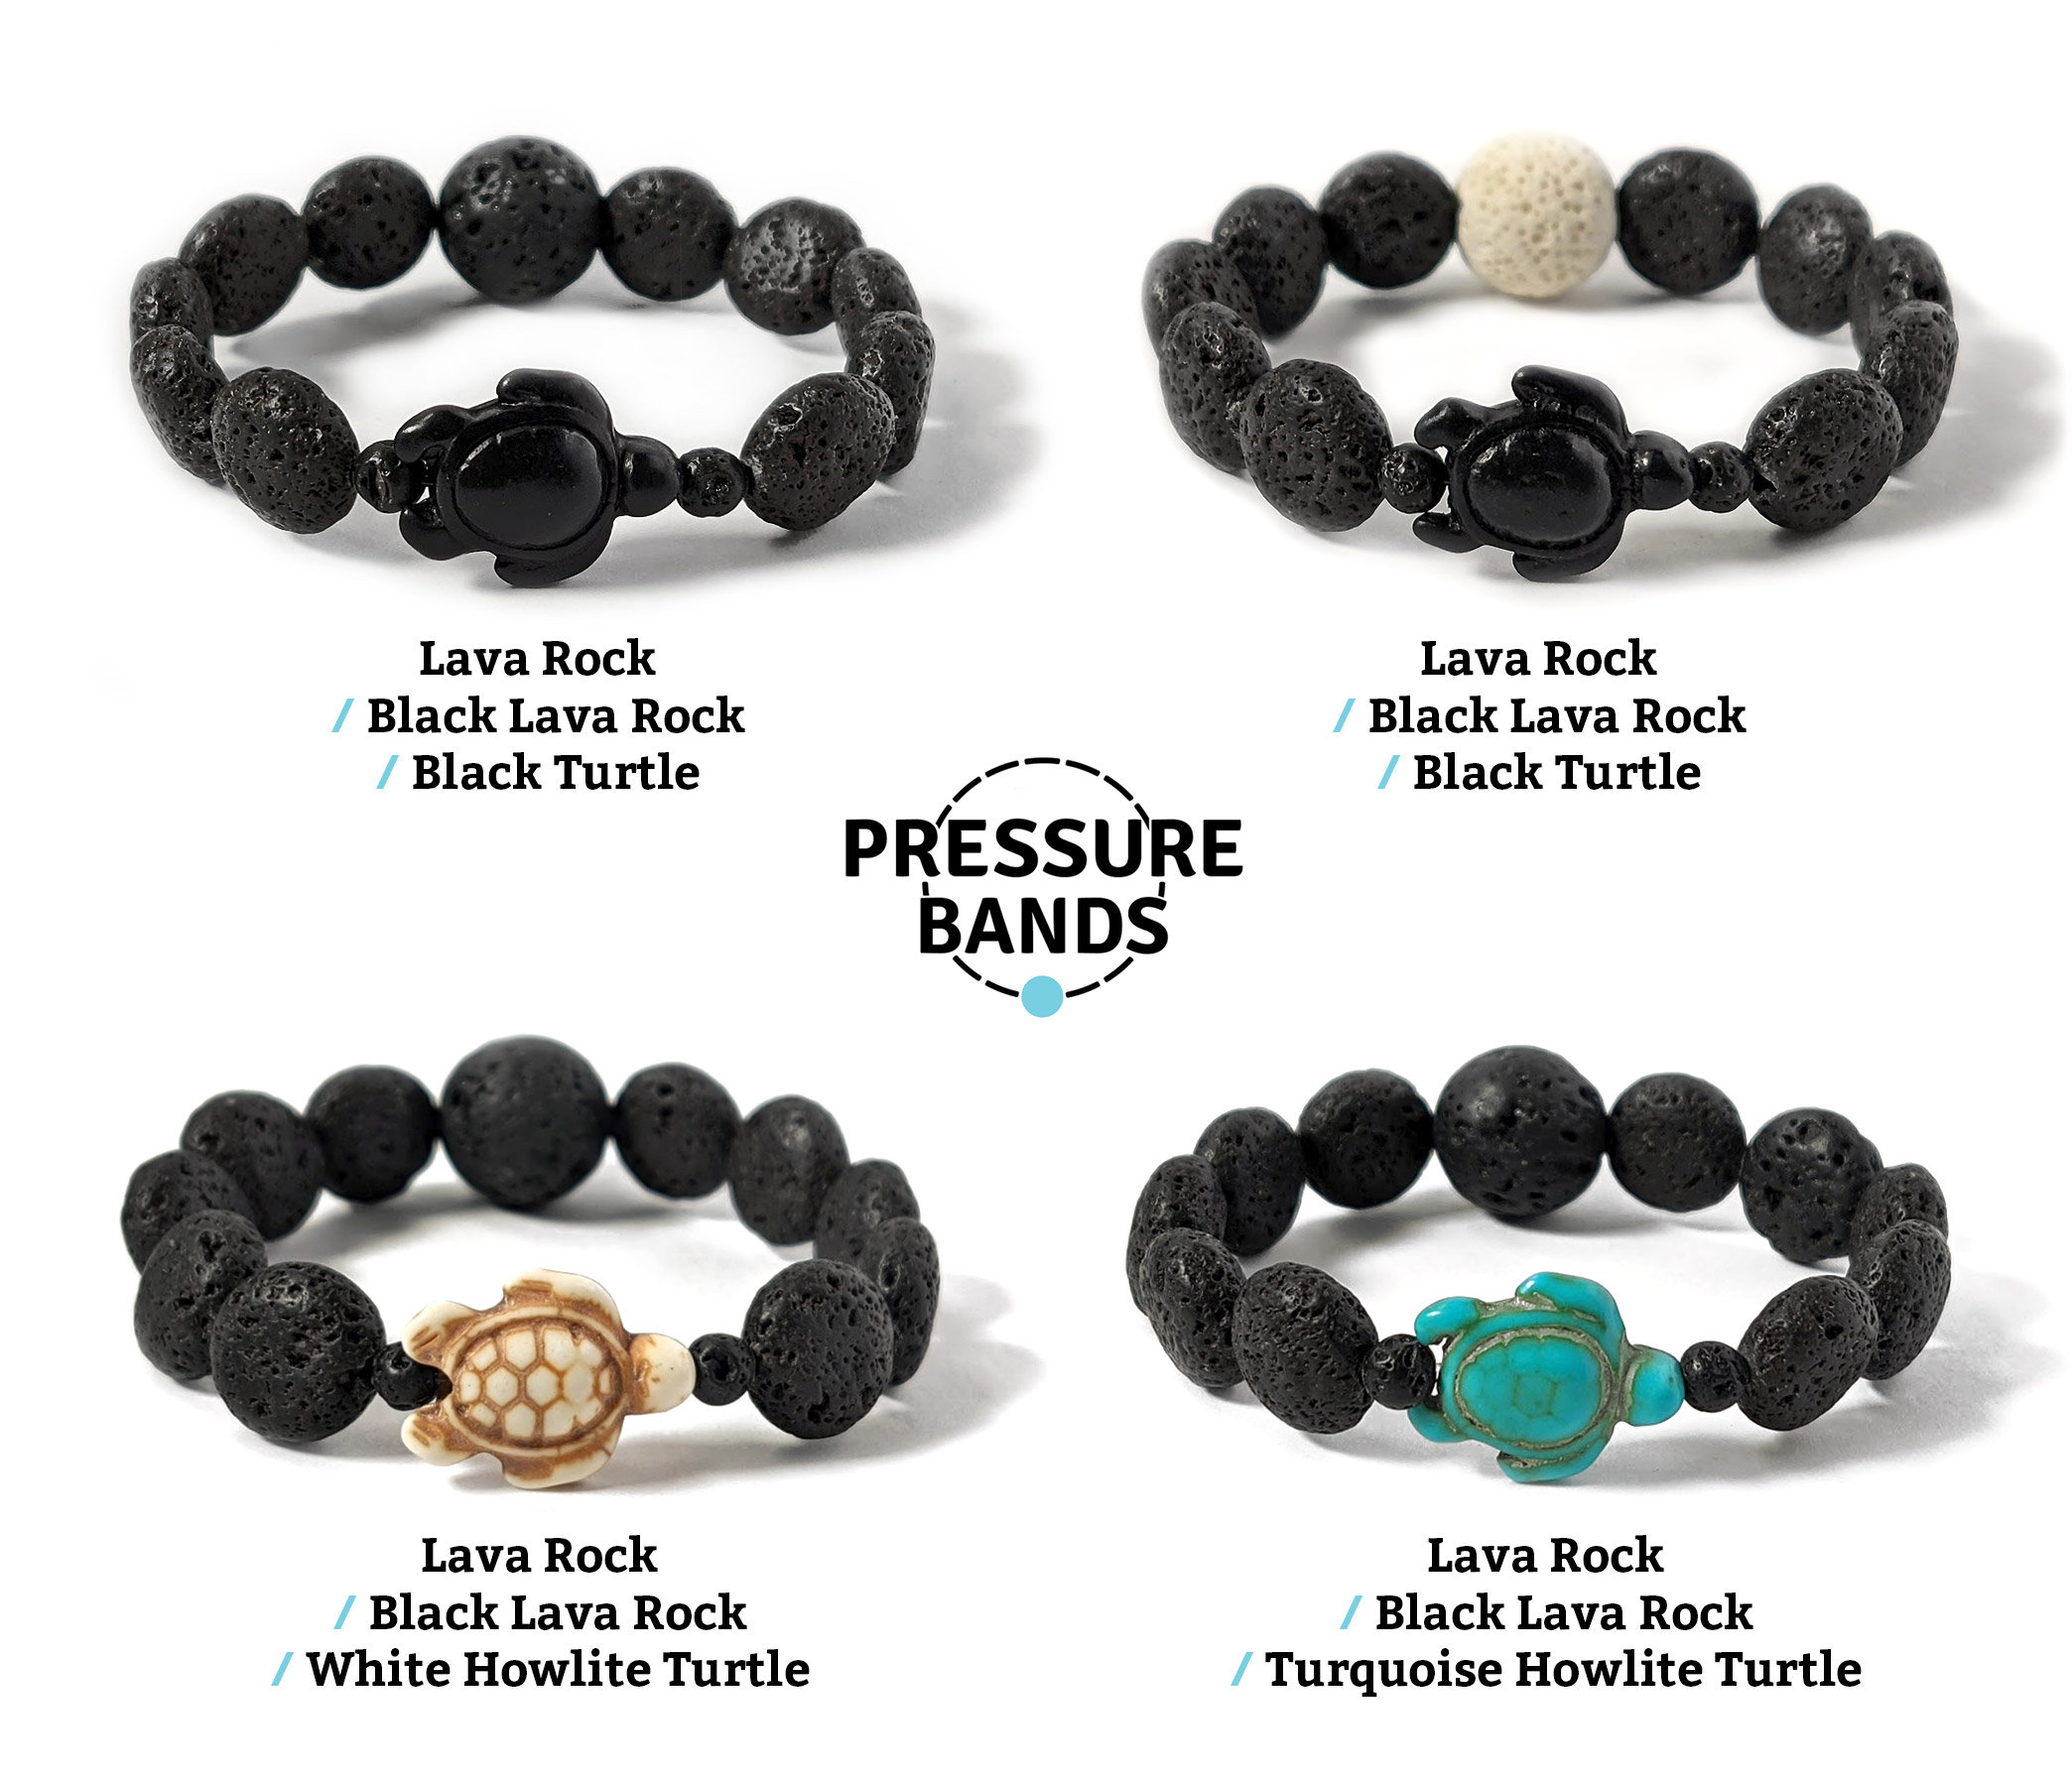 Acupressure Nausea Relief Diffuser Bracelets for Motion Sickness: Black Lava & Moonstone to aid Anxiety 2 Bracelets Pressure Bands Stress